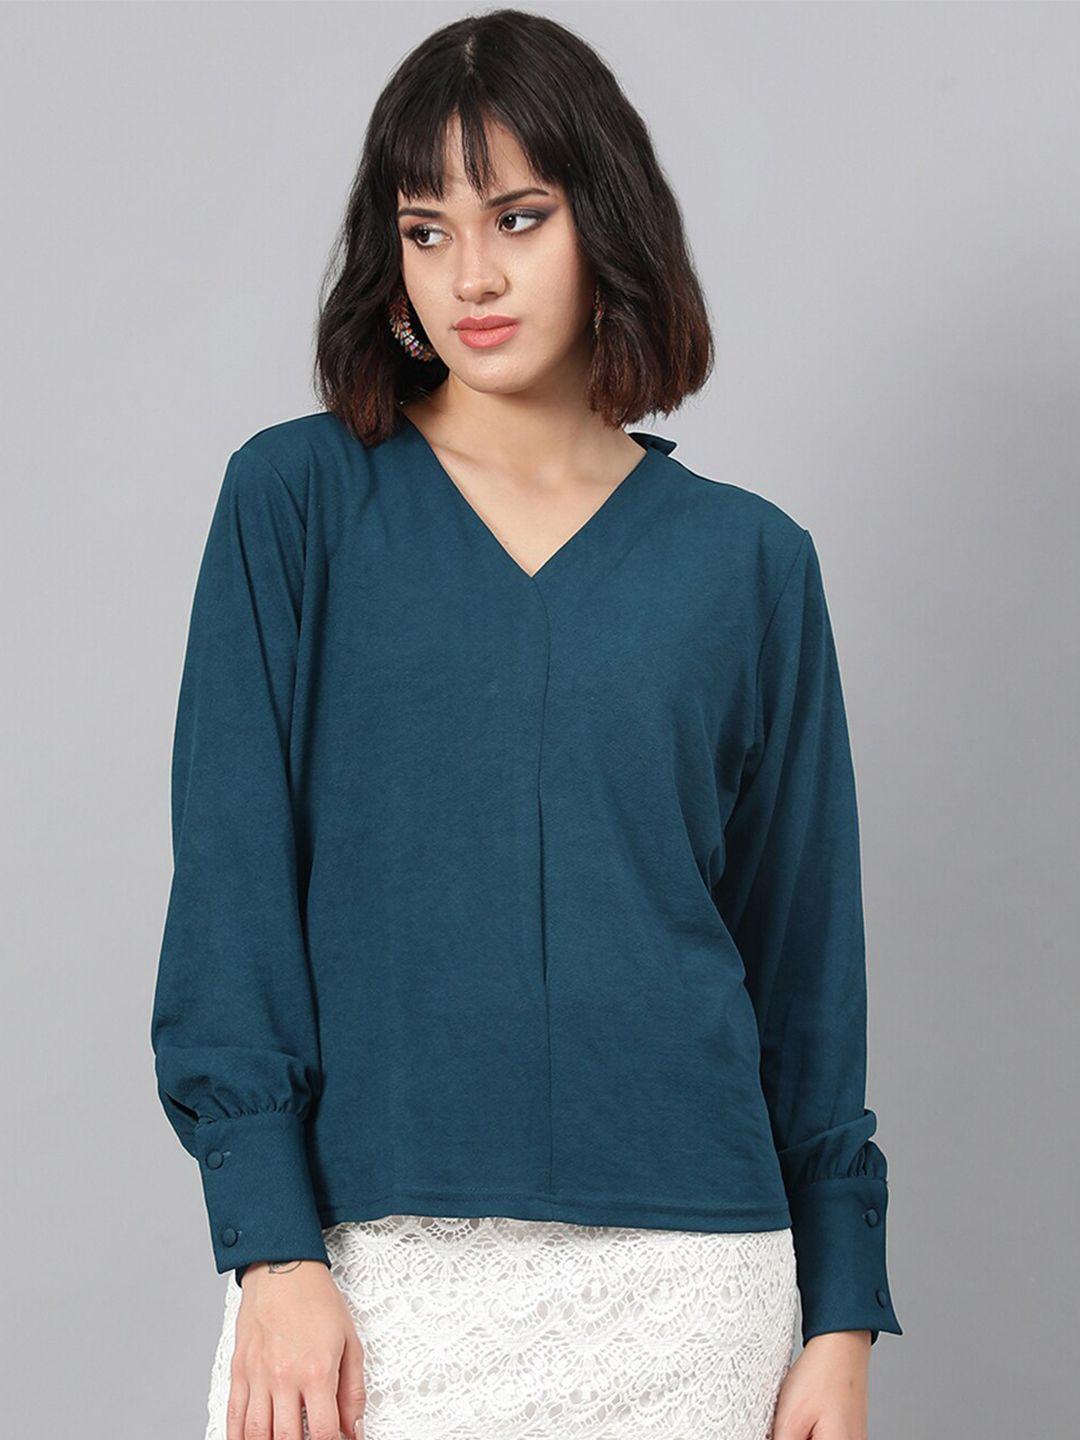 kotty green v-neck cuffed sleeves top